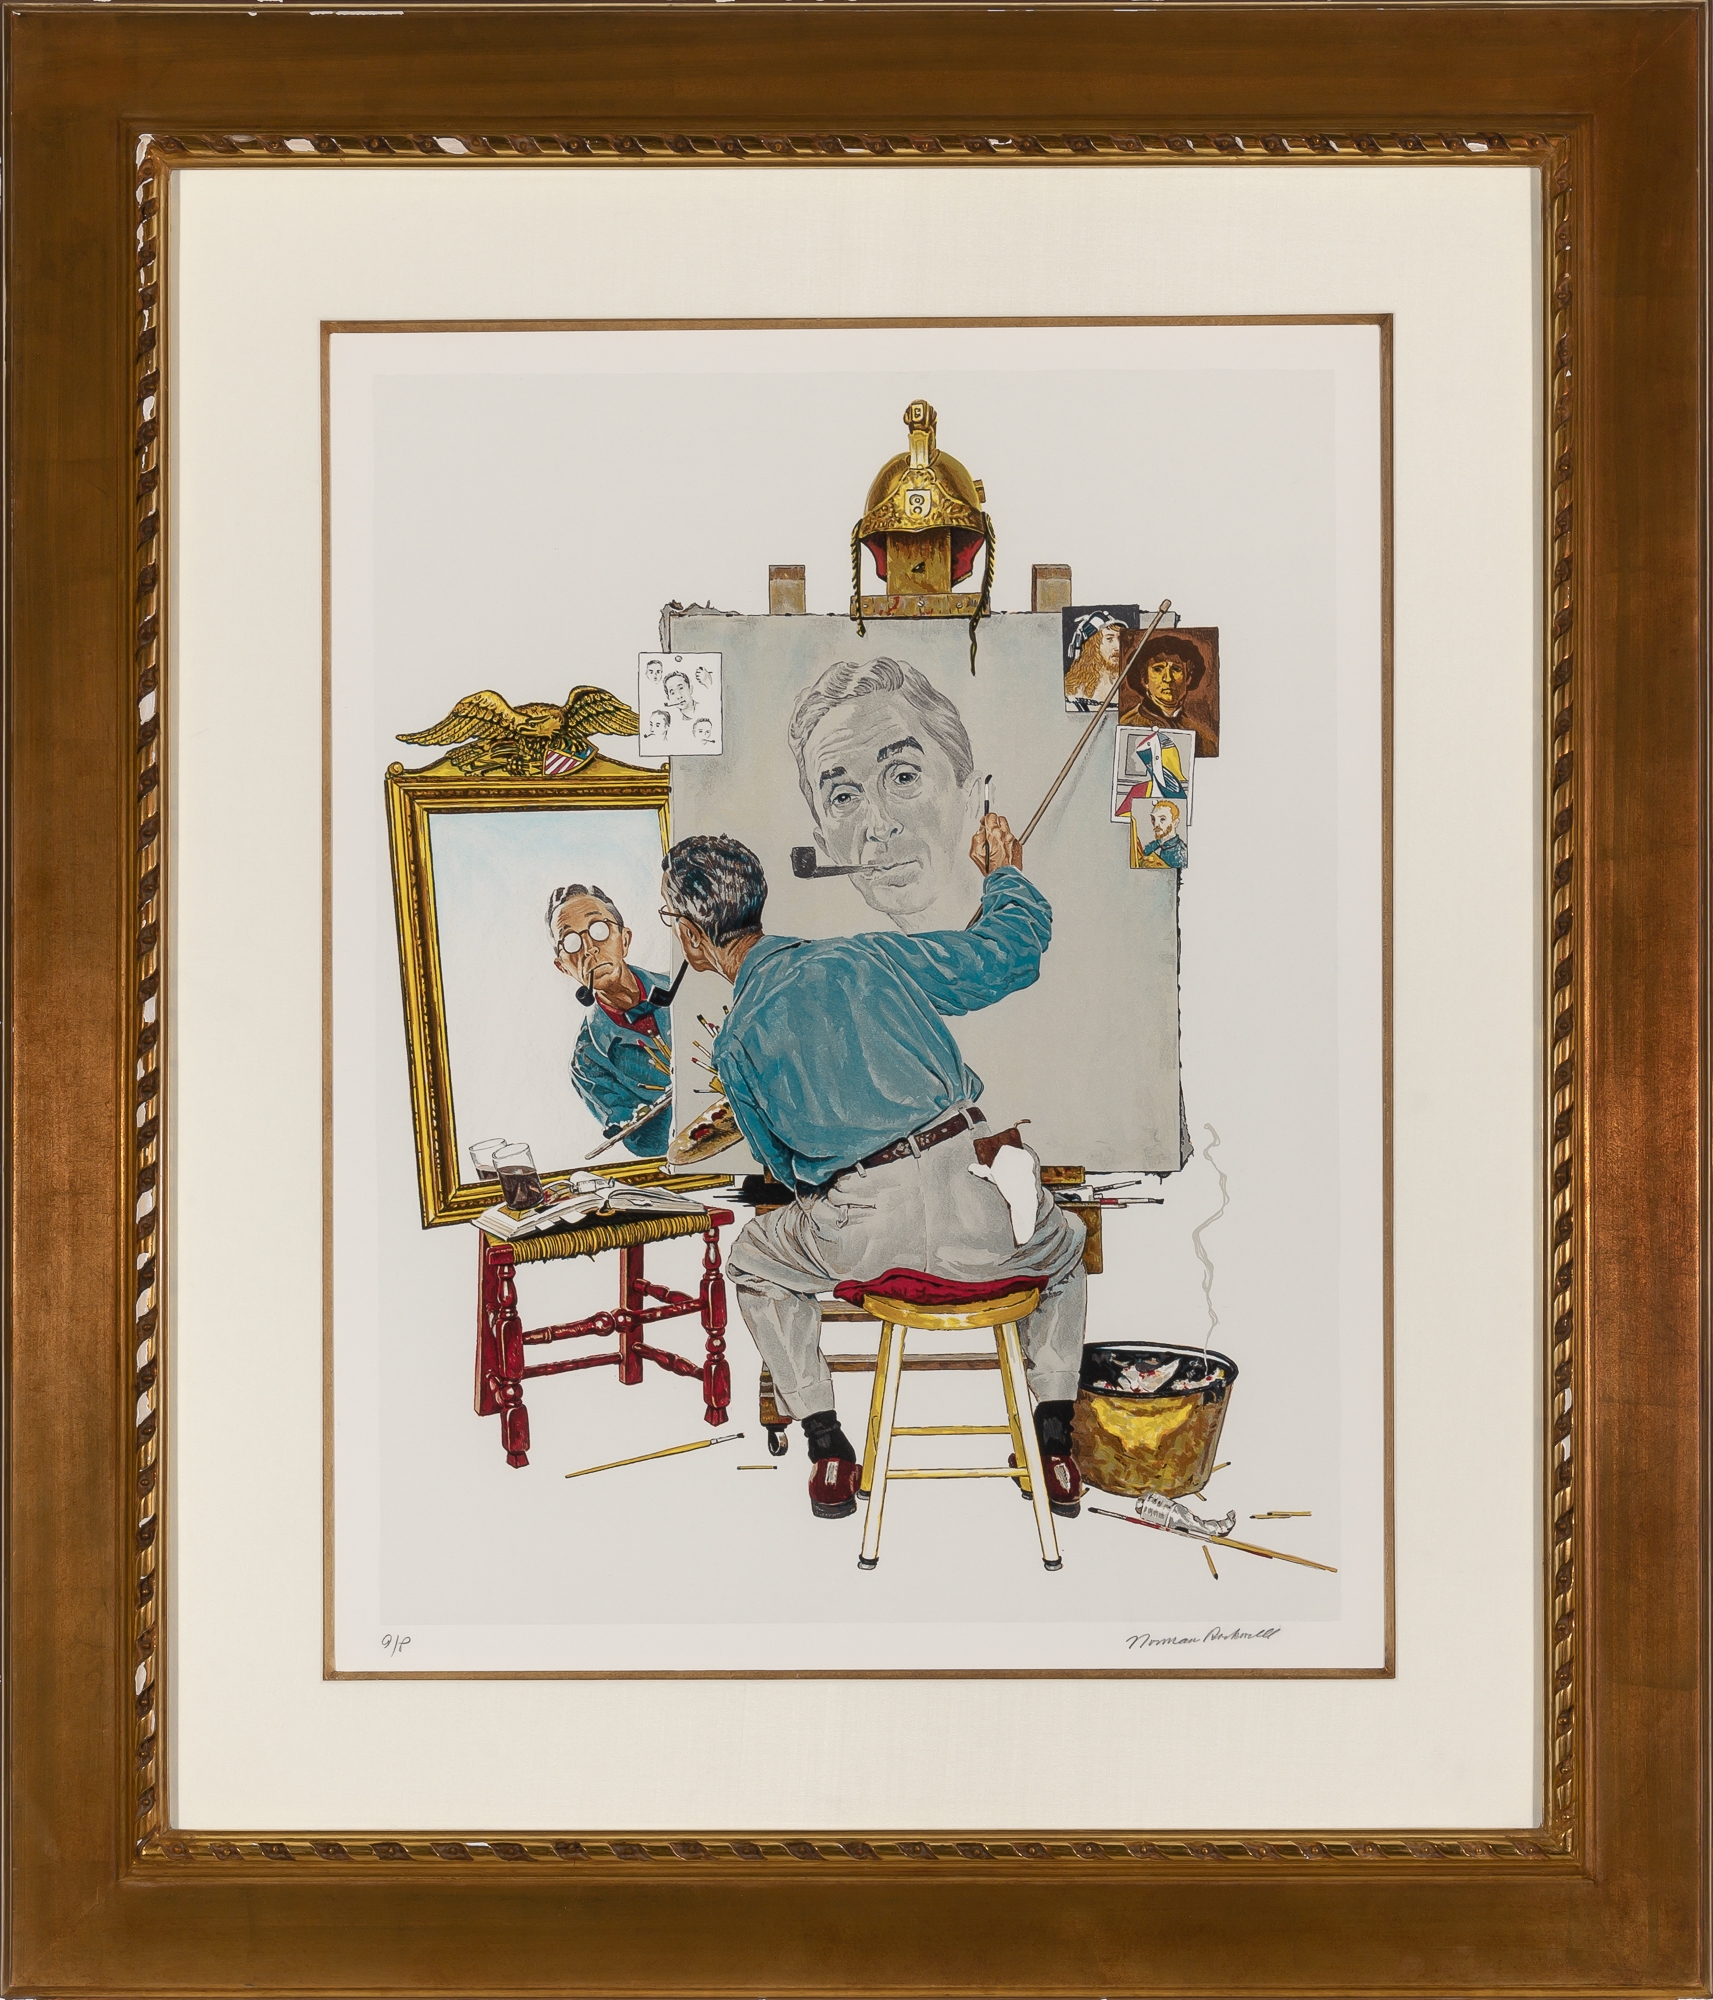 Artwork by Norman Rockwell, TRIPLE SELF PORTRAIT, Made of Color lithograph